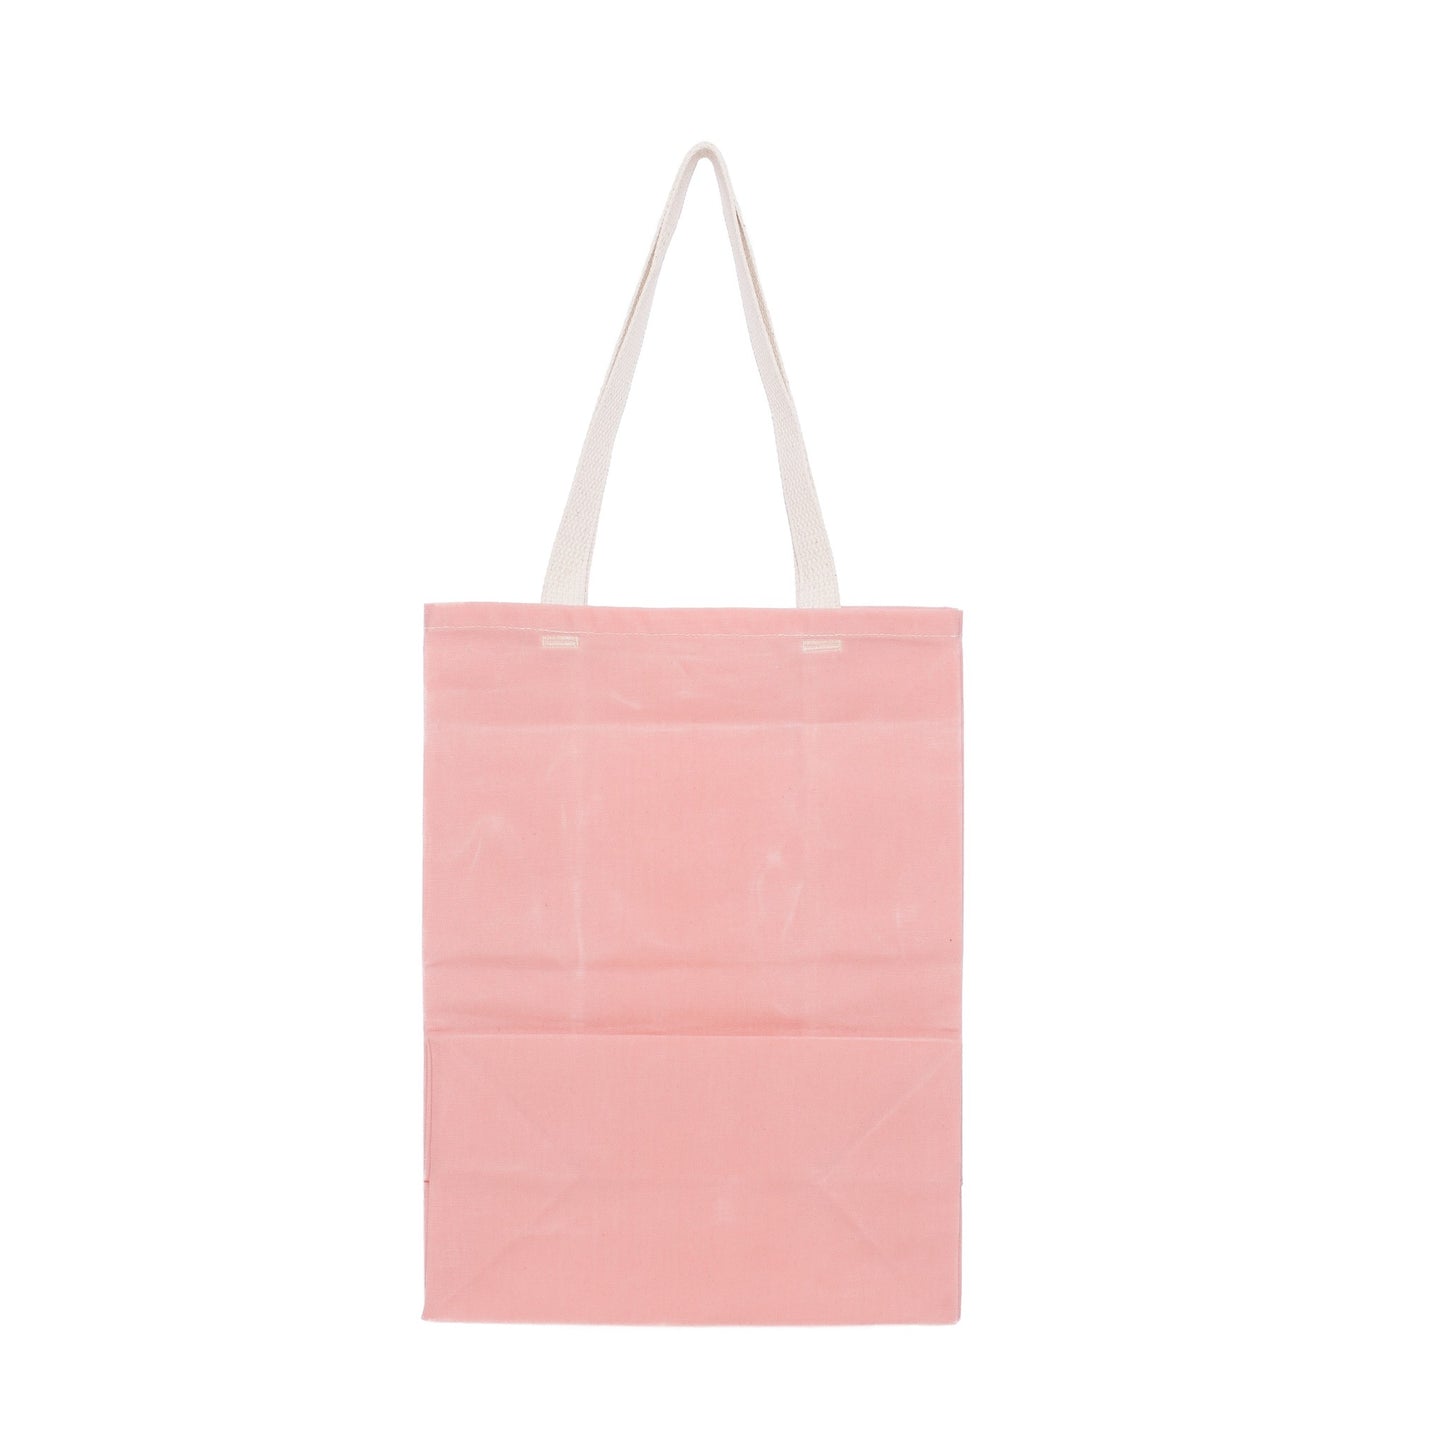 Eco-Friendly Grocery Tote - Coral Pink